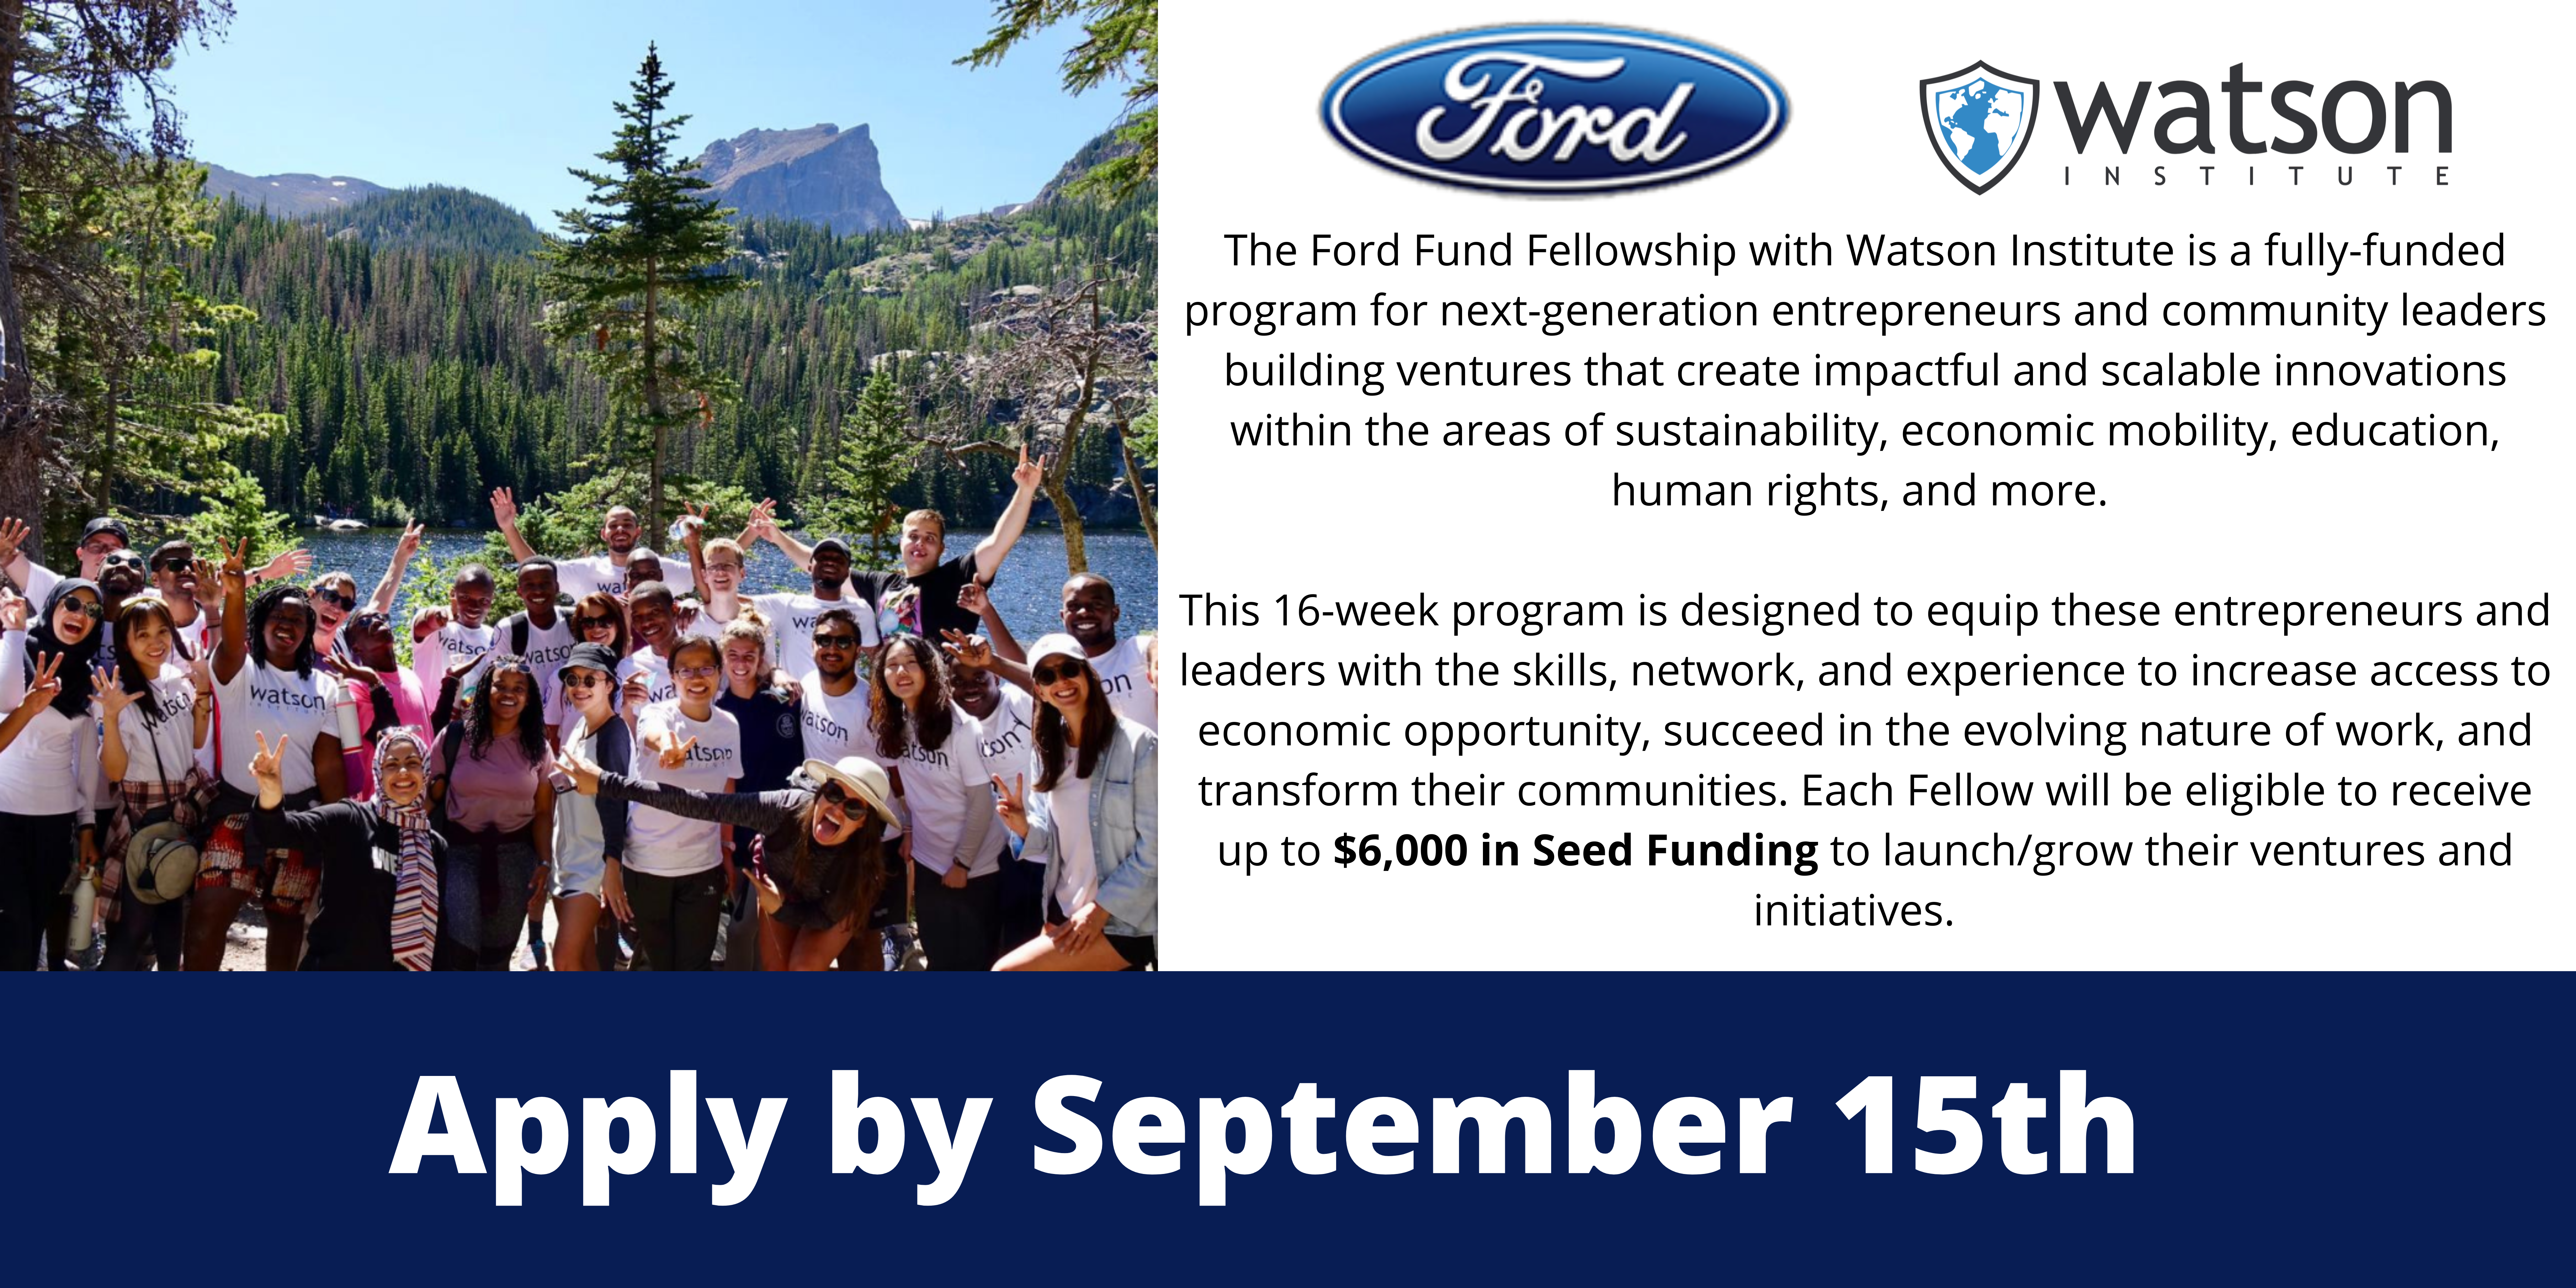 Watson Ford Fund Fellowship 2022 for next-gen Entrepreneurs and Community Leaders (Fully-funded)